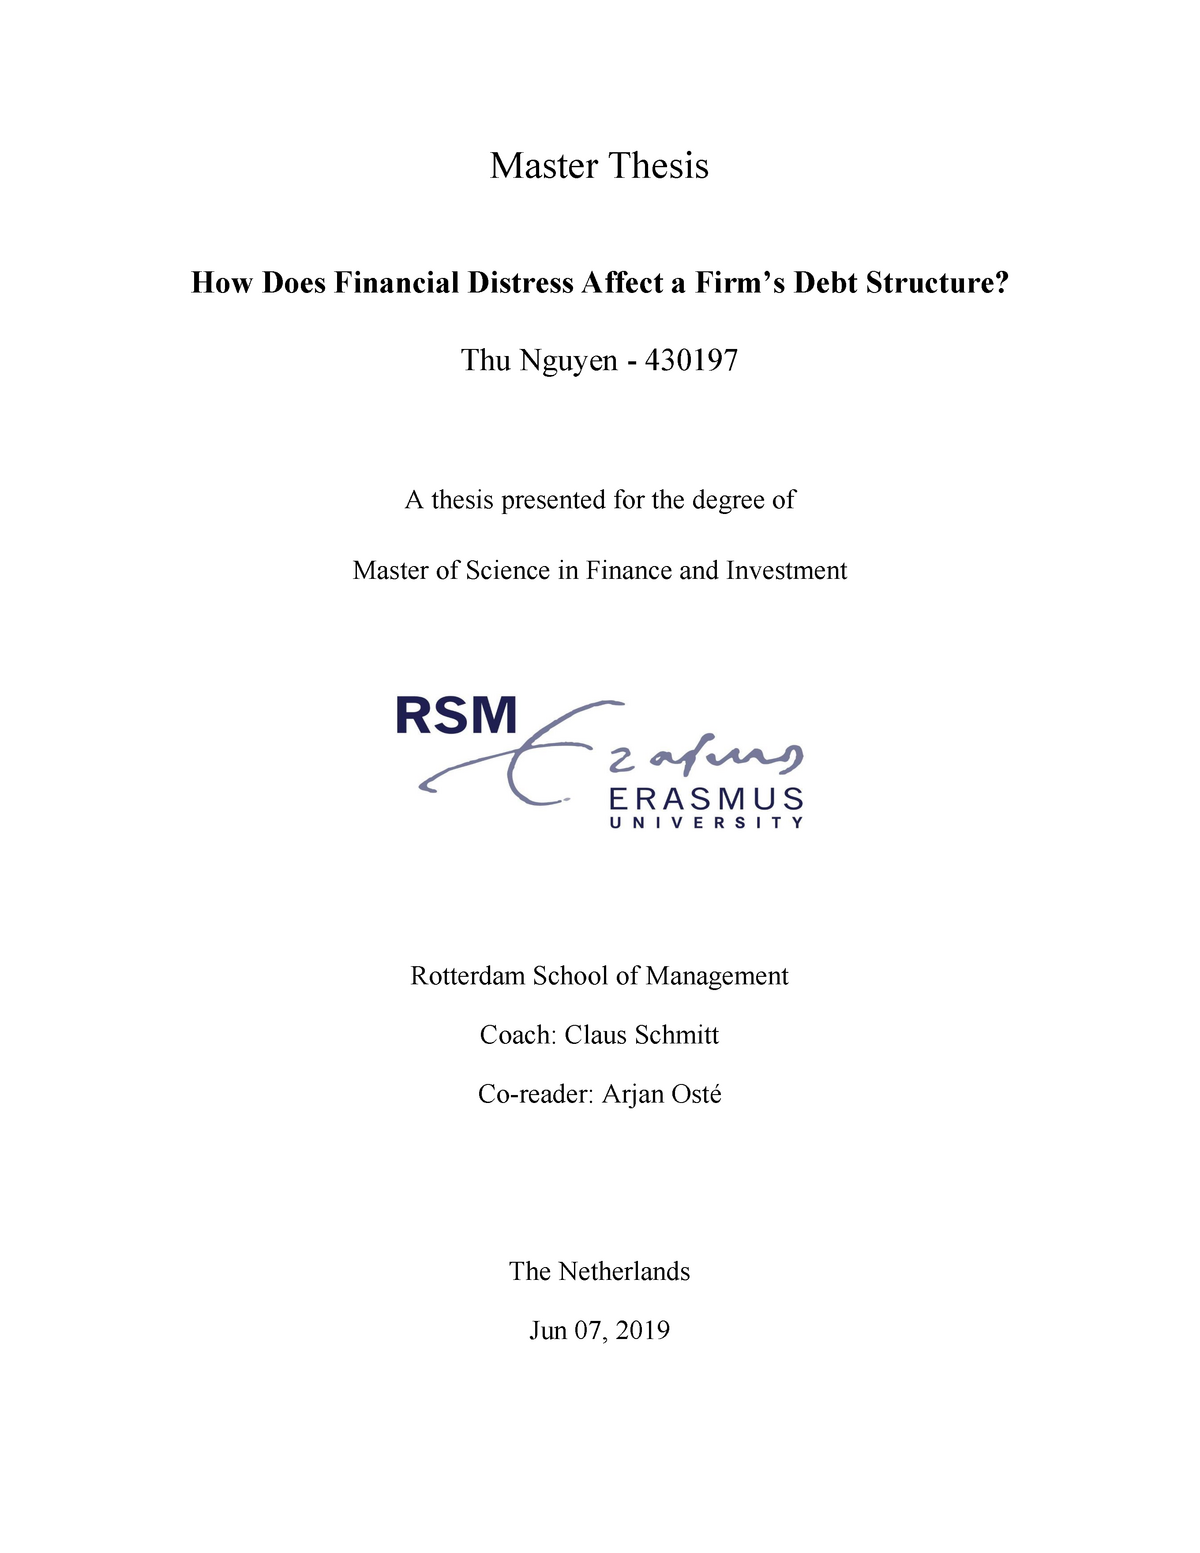 phd thesis on financial regulation